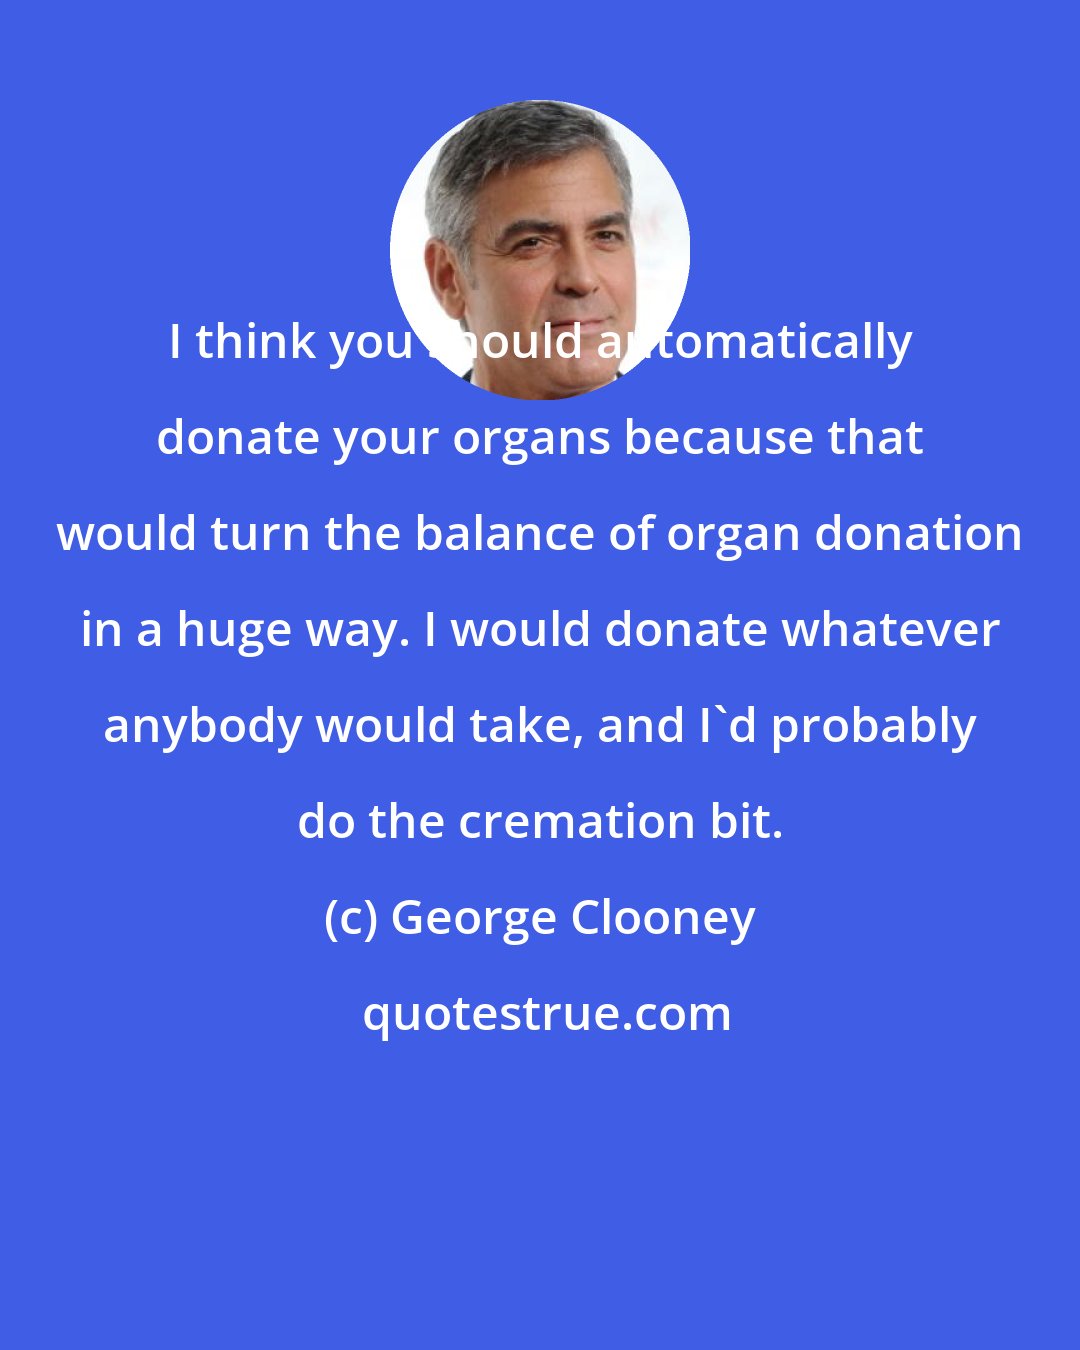 George Clooney: I think you should automatically donate your organs because that would turn the balance of organ donation in a huge way. I would donate whatever anybody would take, and I'd probably do the cremation bit.